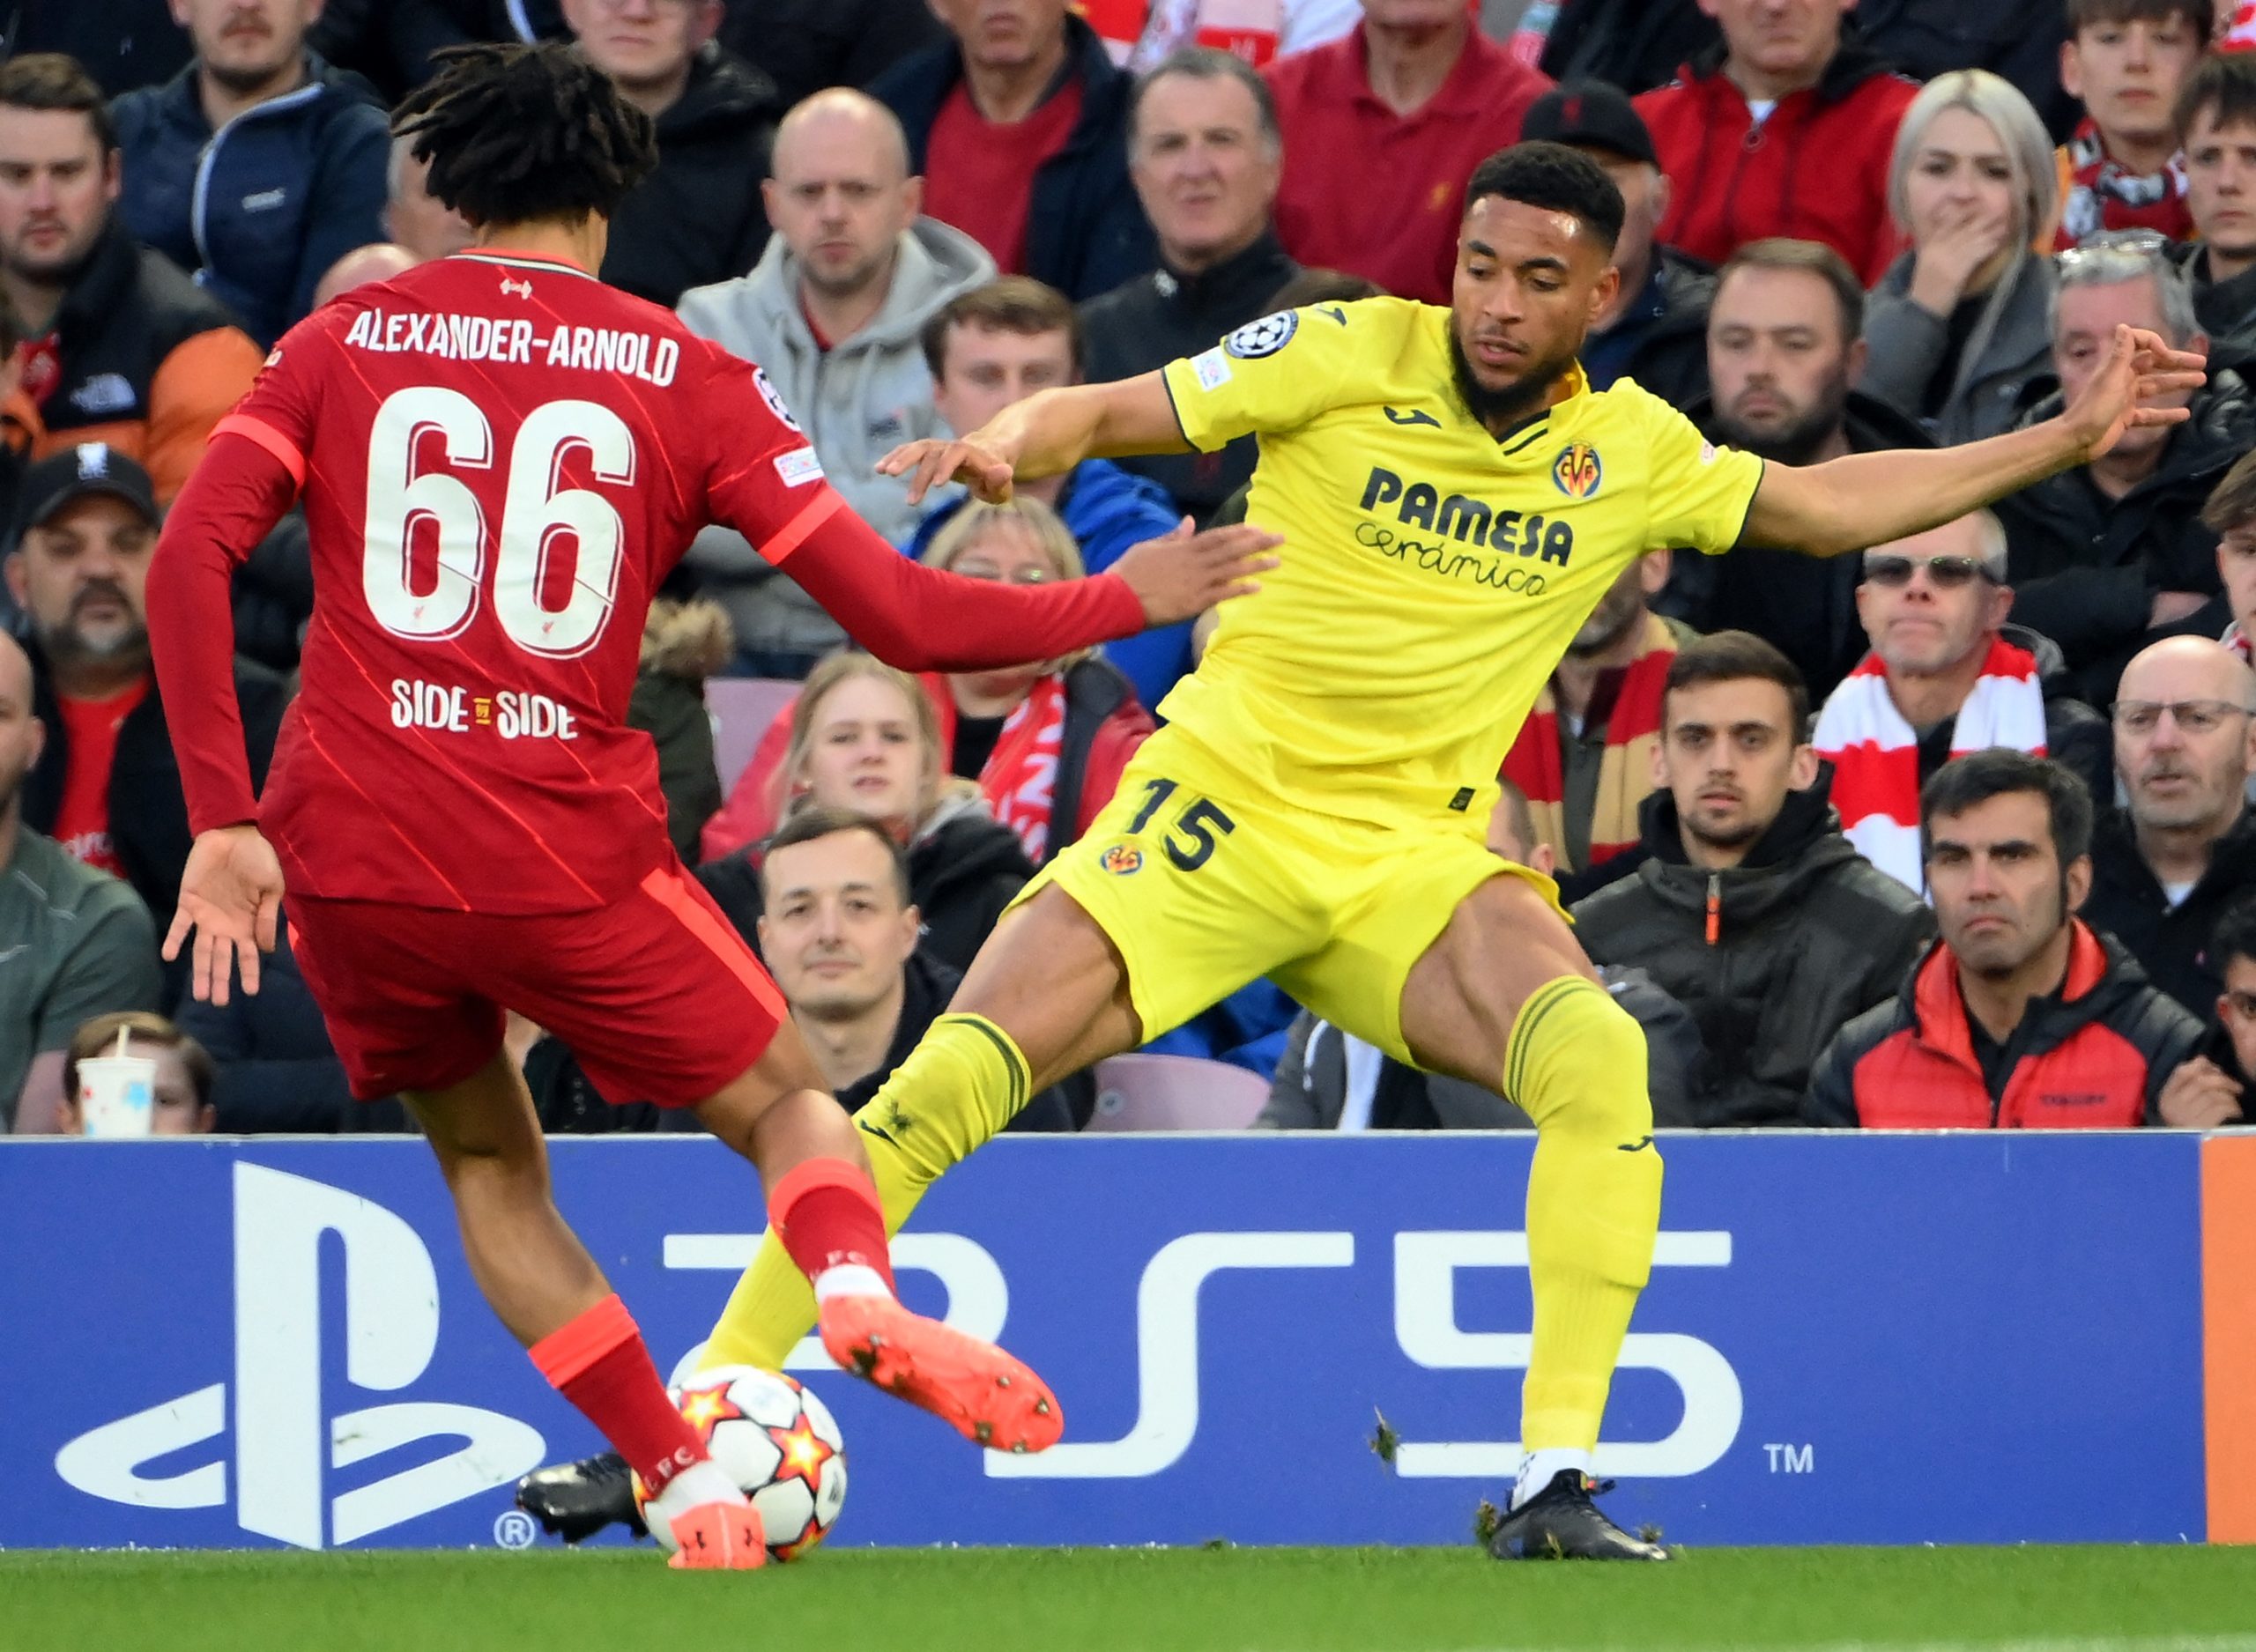 Trent Alexander Arnold will miss Carabao Cup final vs Chelsea with knee injury